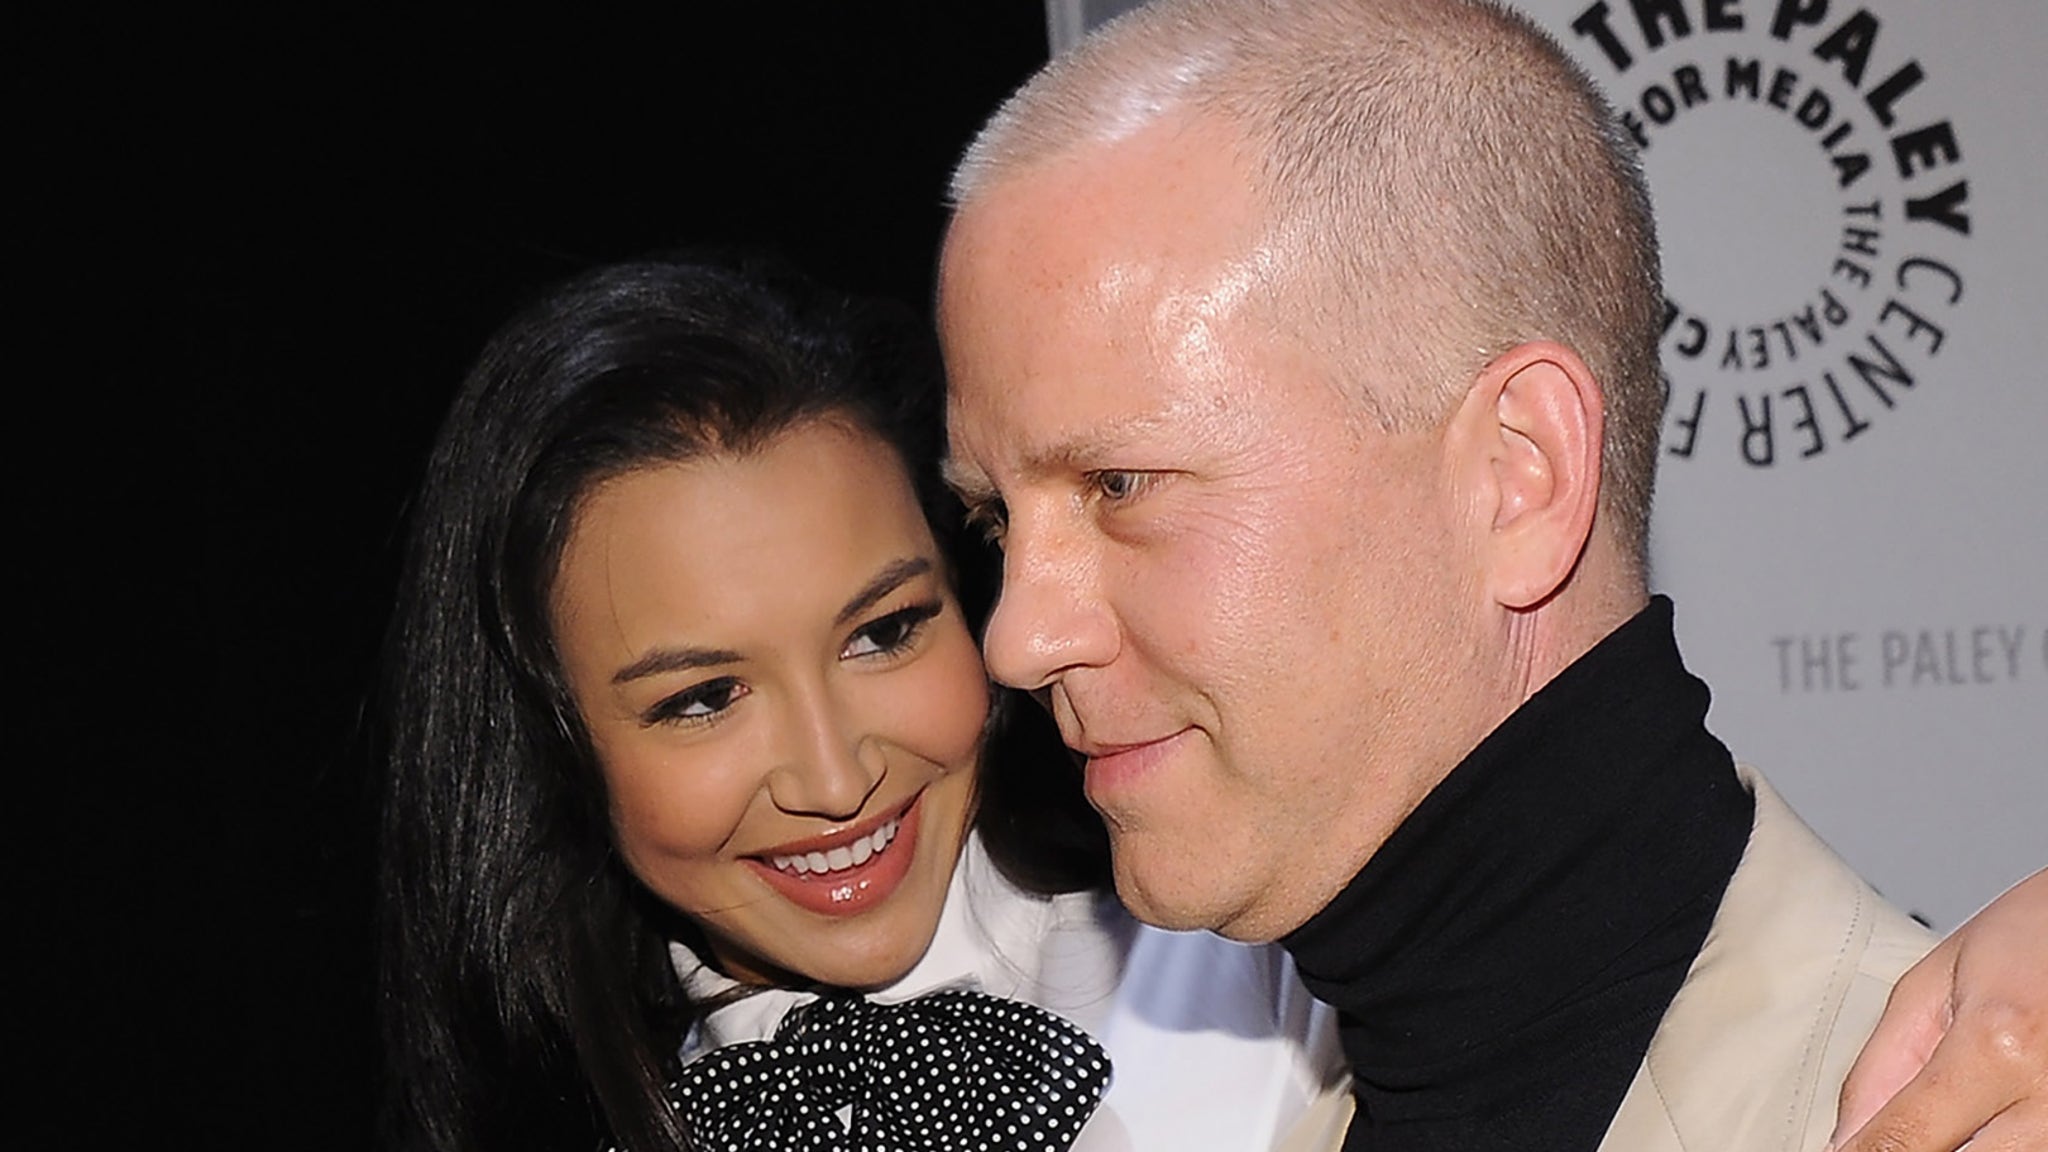 Ryan Murphy responds to Naya Rivera’s father saying he promised her son